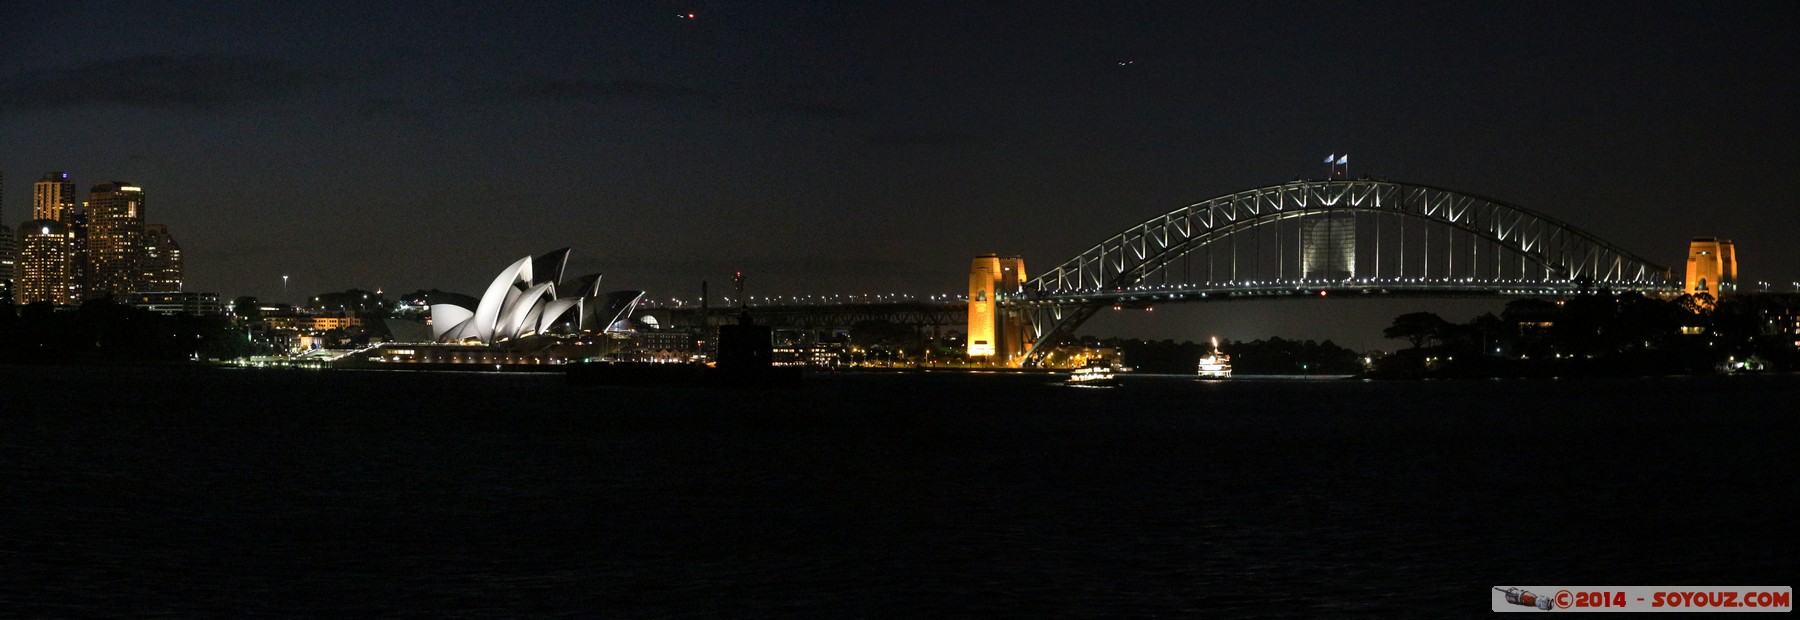 Sydney Harbour by Night - Opera House and Harbour Bridge panorama
Stitched Panorama
Mots-clés: AUS Australie Bondi Junction Garden Island geo:lat=-33.85384800 geo:lon=151.23477700 geotagged New South Wales Sydney Nuit Sydney Harbour Port Jackson Harbour Bridge Opera House patrimoine unesco Pont panorama